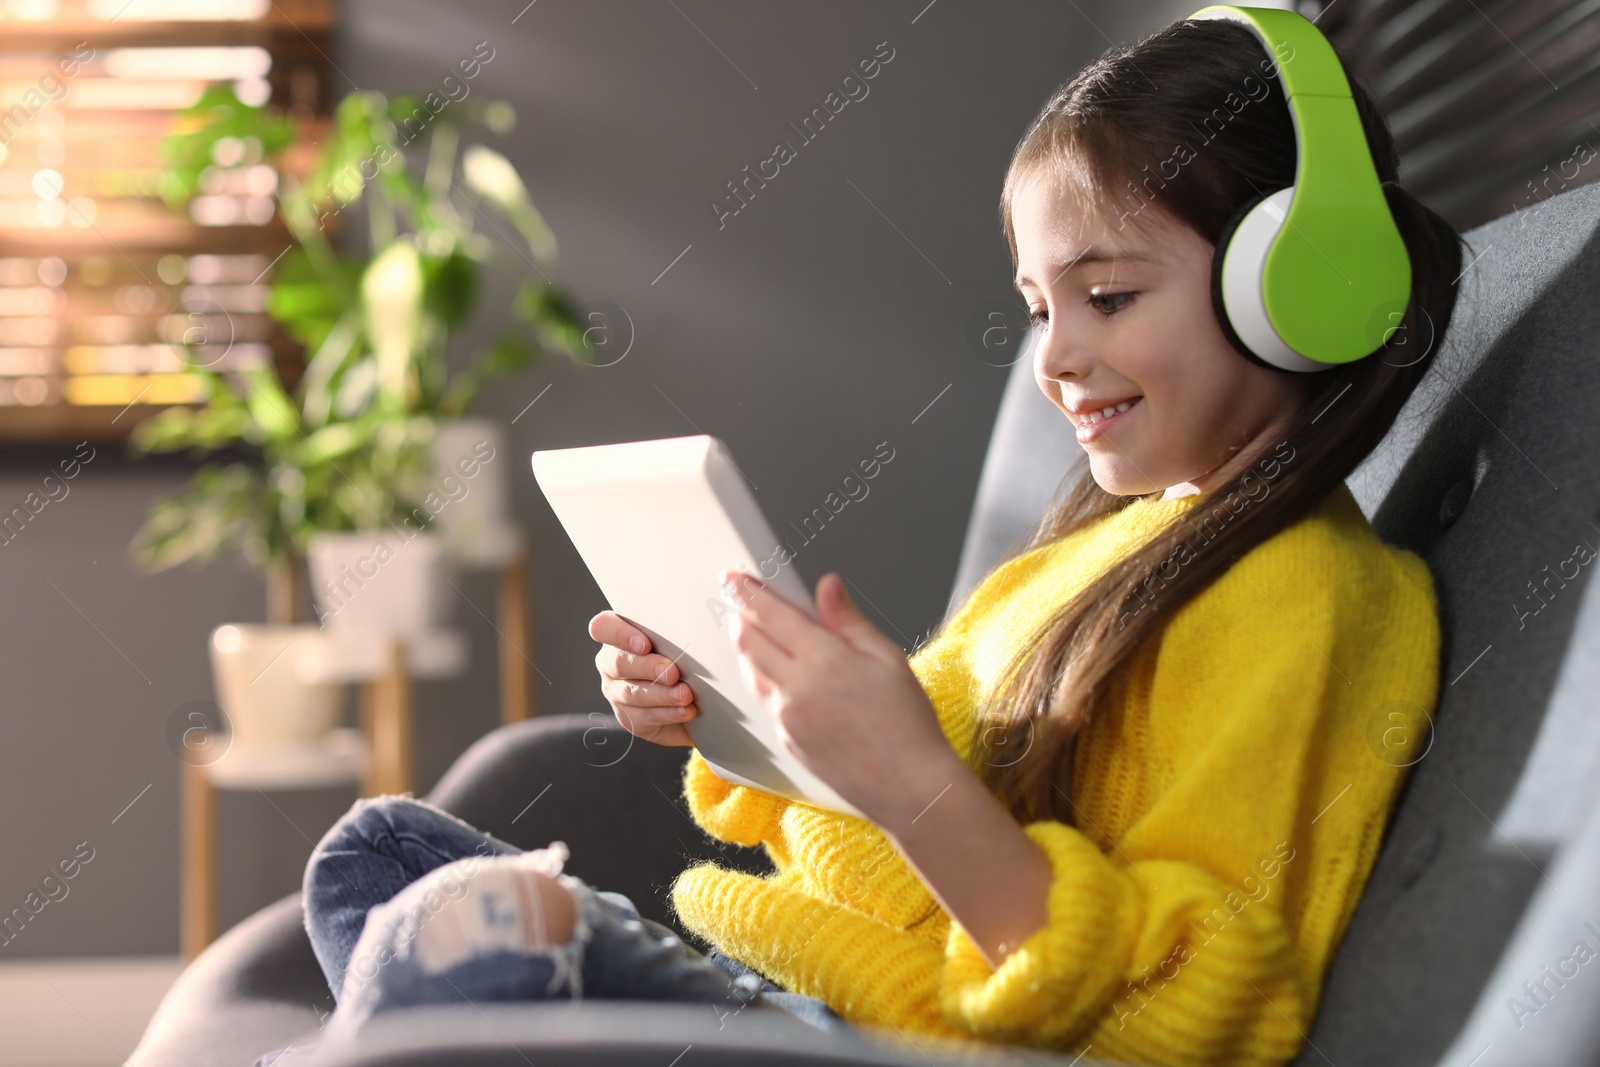 Photo of Cute little girl with headphones and tablet listening to audiobook at home